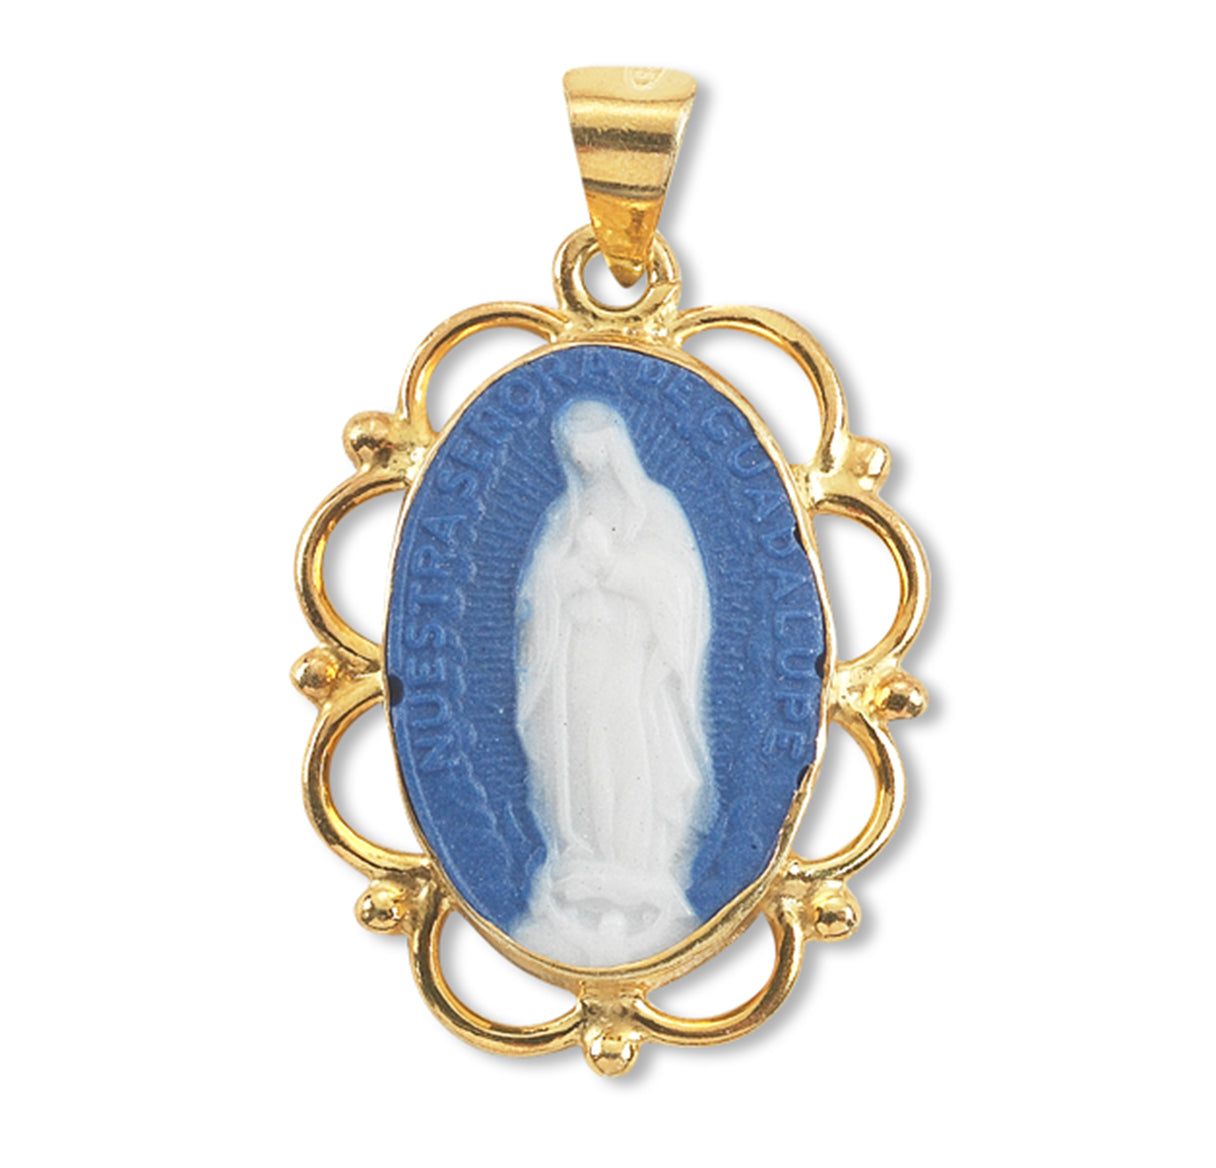 Our Lady of Guadalupe Cameo Medal